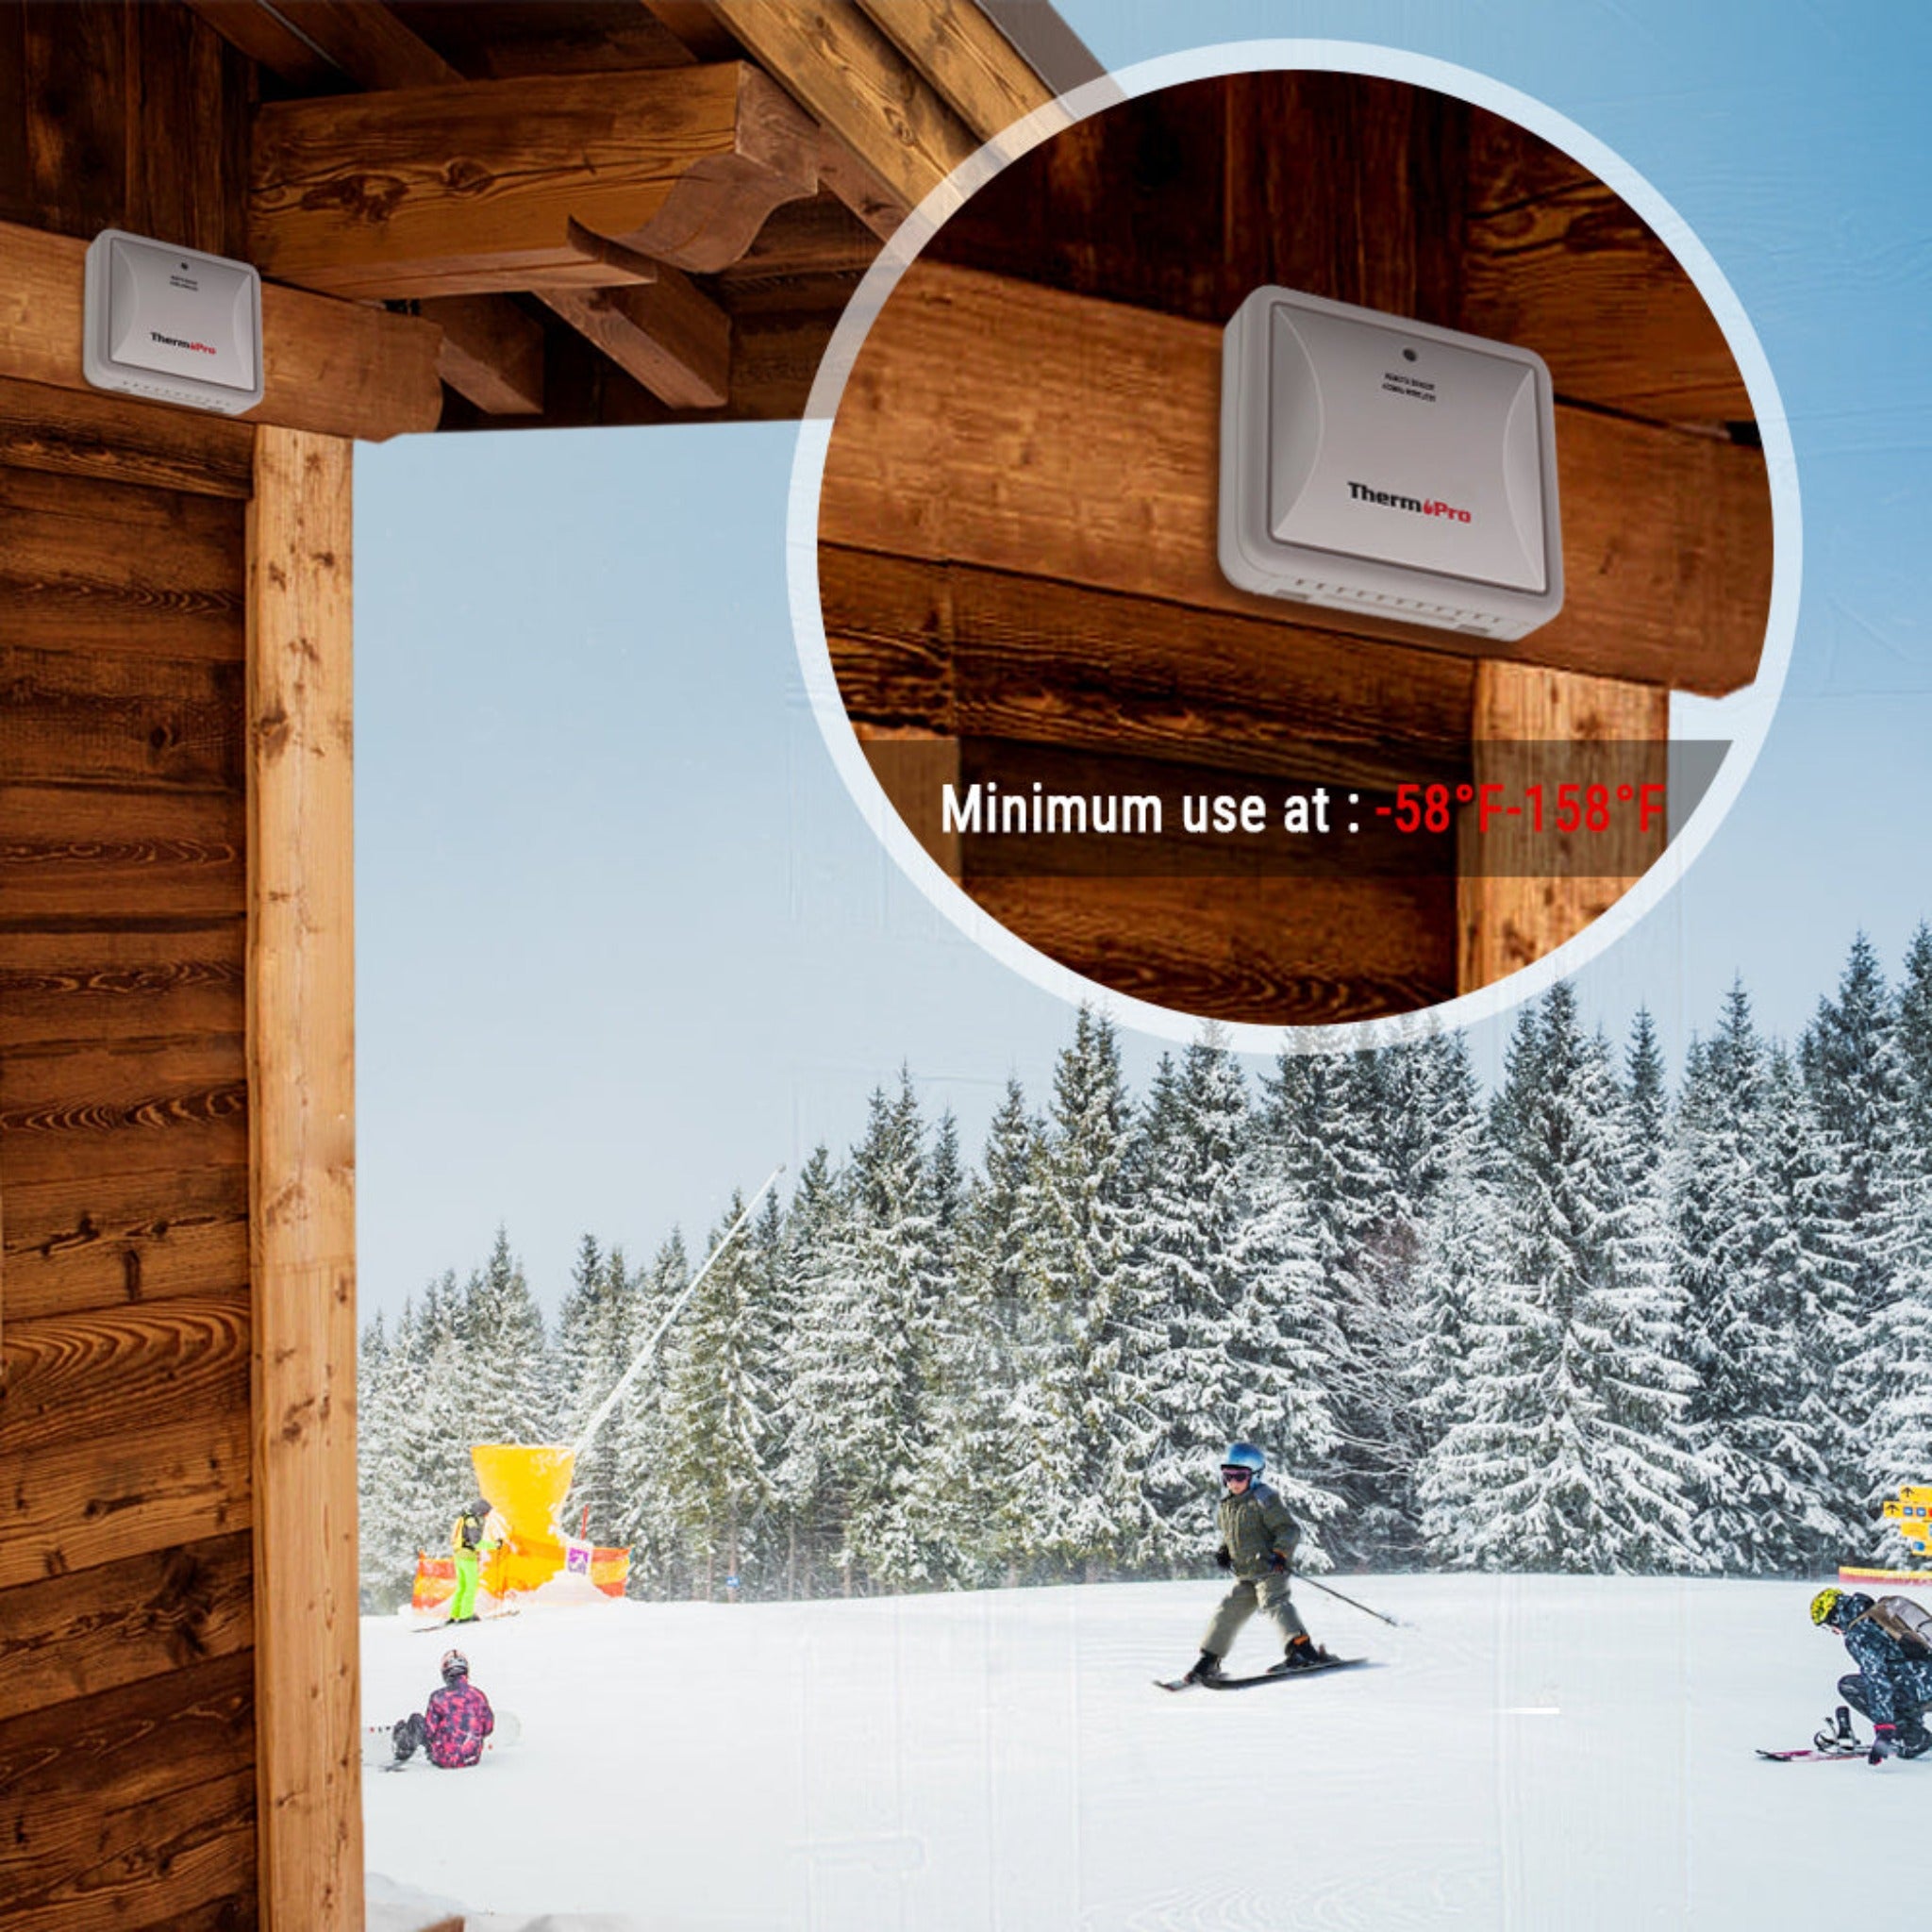 Hatching Time Therm Pro. Sensor can be seen in image mounted to wall outside of wooden cabin.  Shows minimum use of 58 degrees celsius or 158 degrees Fahrenheit. 